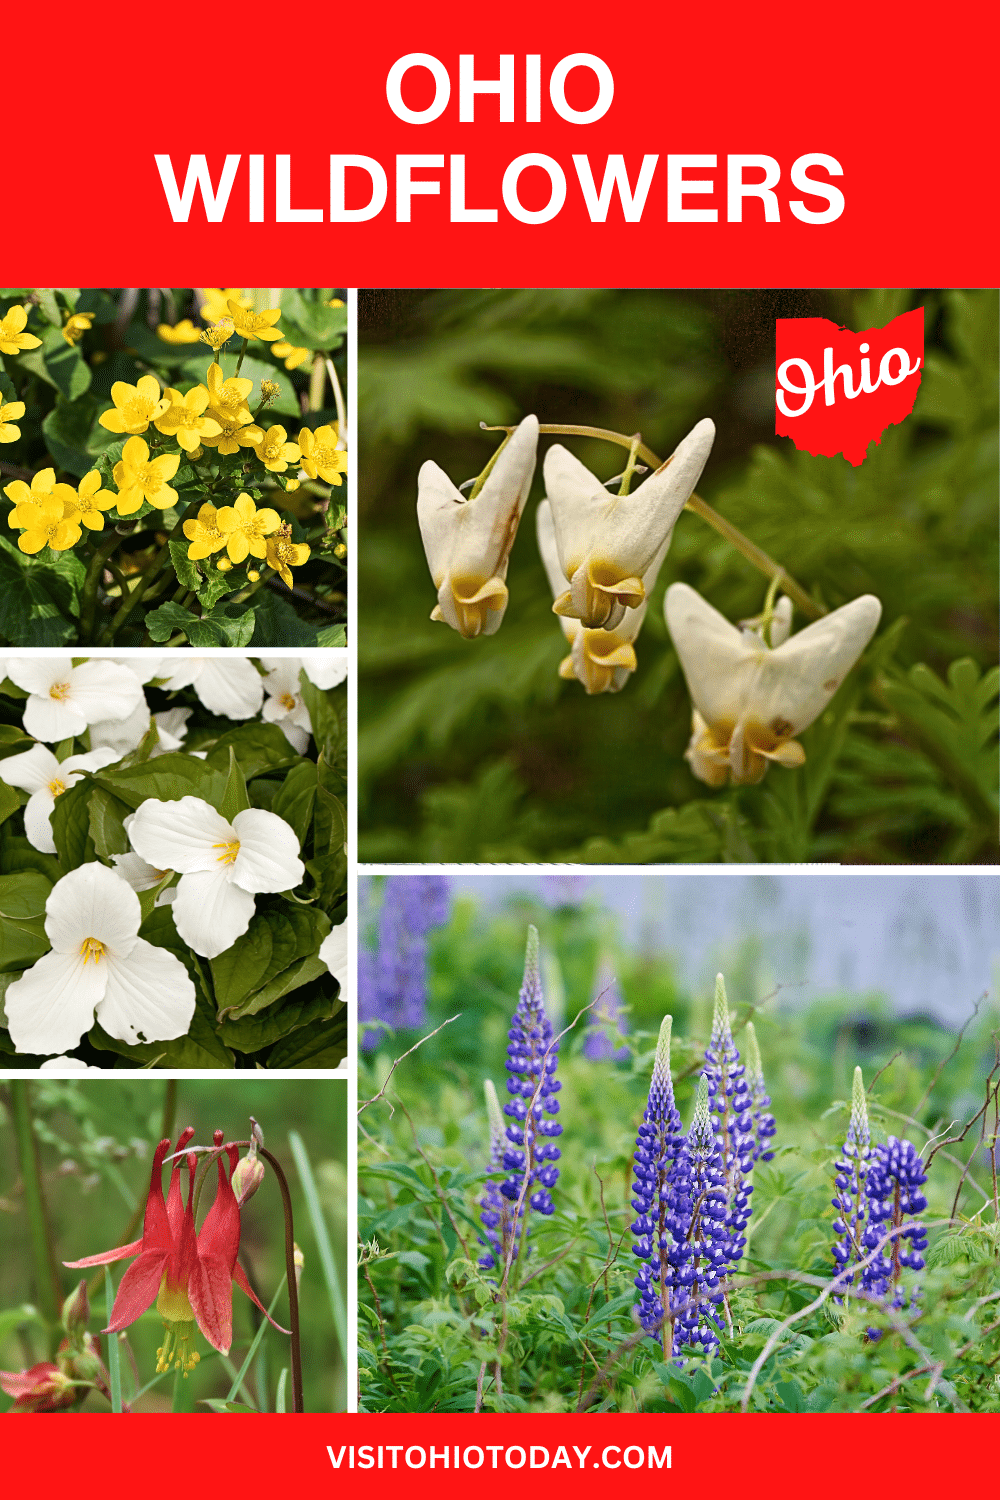 With all its beautiful parks and preserves, there are a lot of wildflowers in Ohio. If you are in Southern Ohio, the season starts in early April; if you’re in Northern Ohio, the season starts in early May, and the season for most Ohio wildflowers is very short.